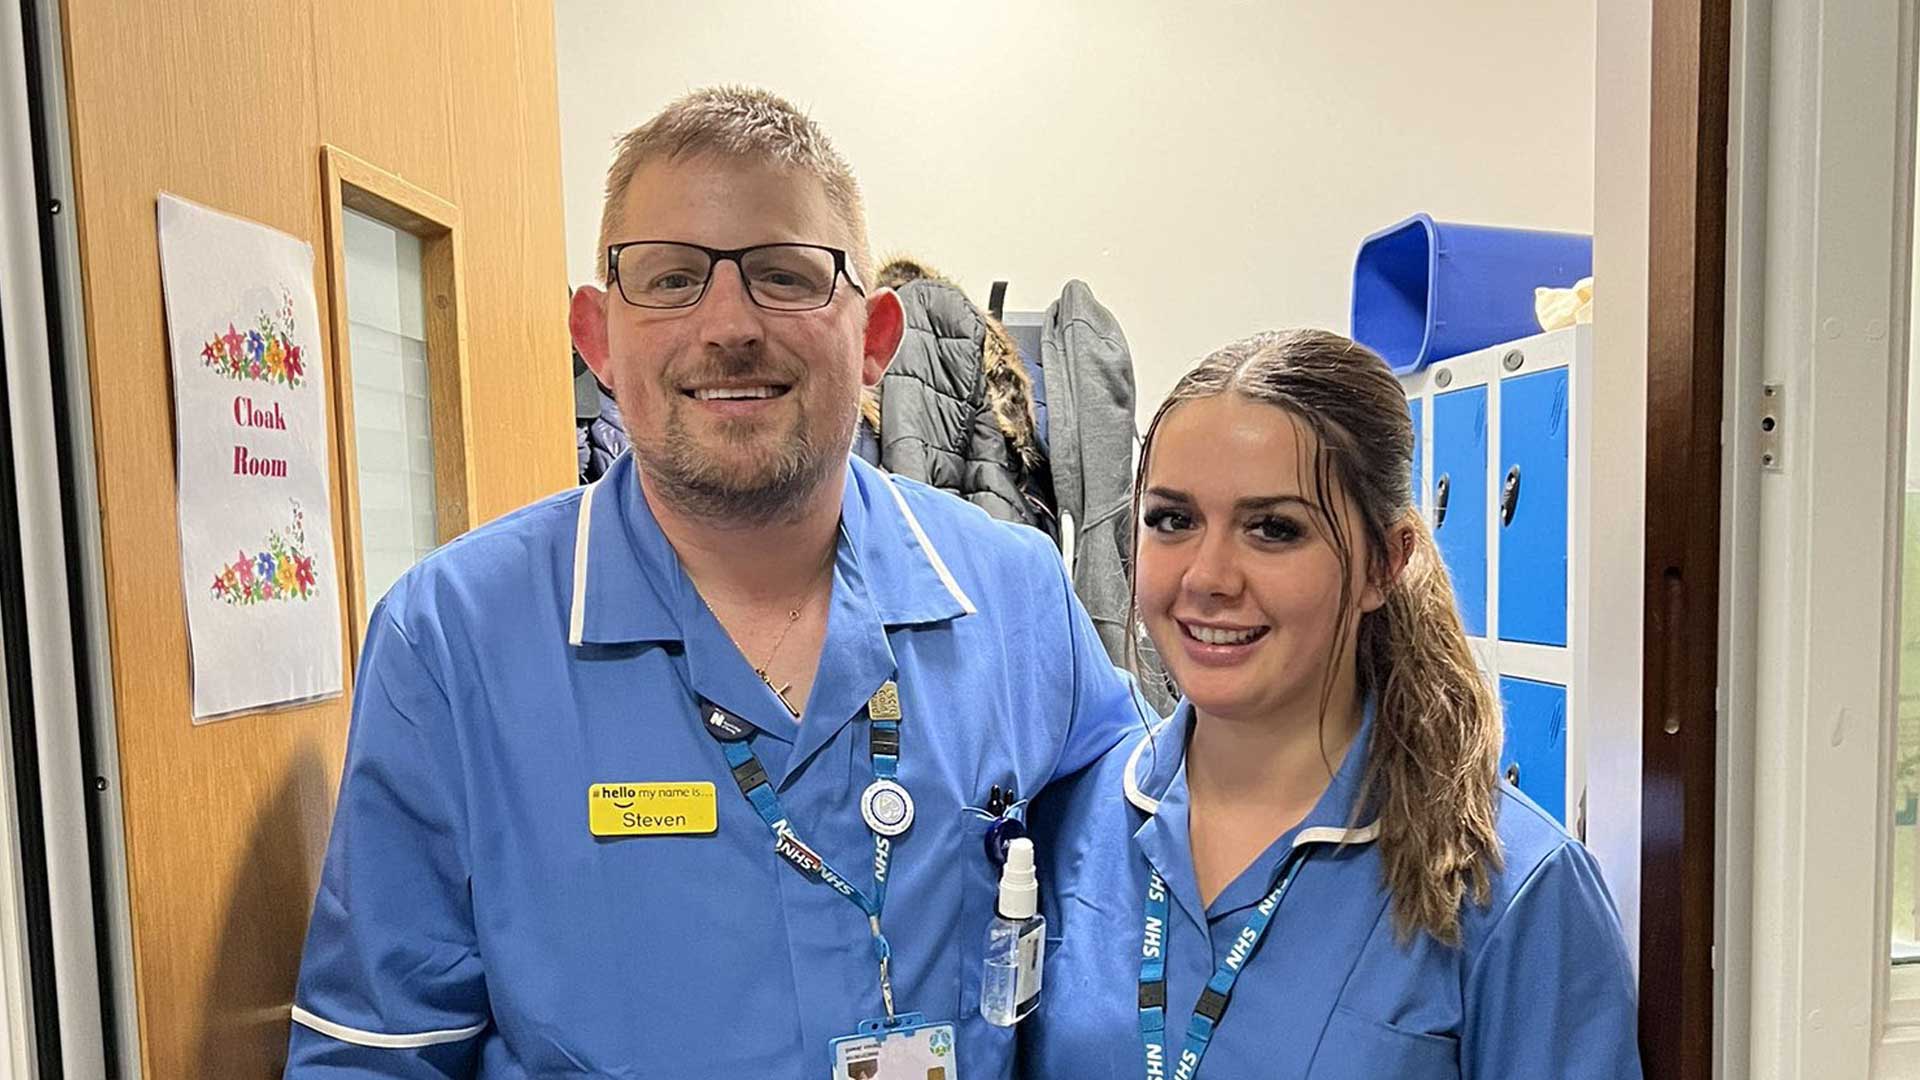 Steven and Stevie-Leigh stand close together wearing their nurses uniform and smile at the camera.